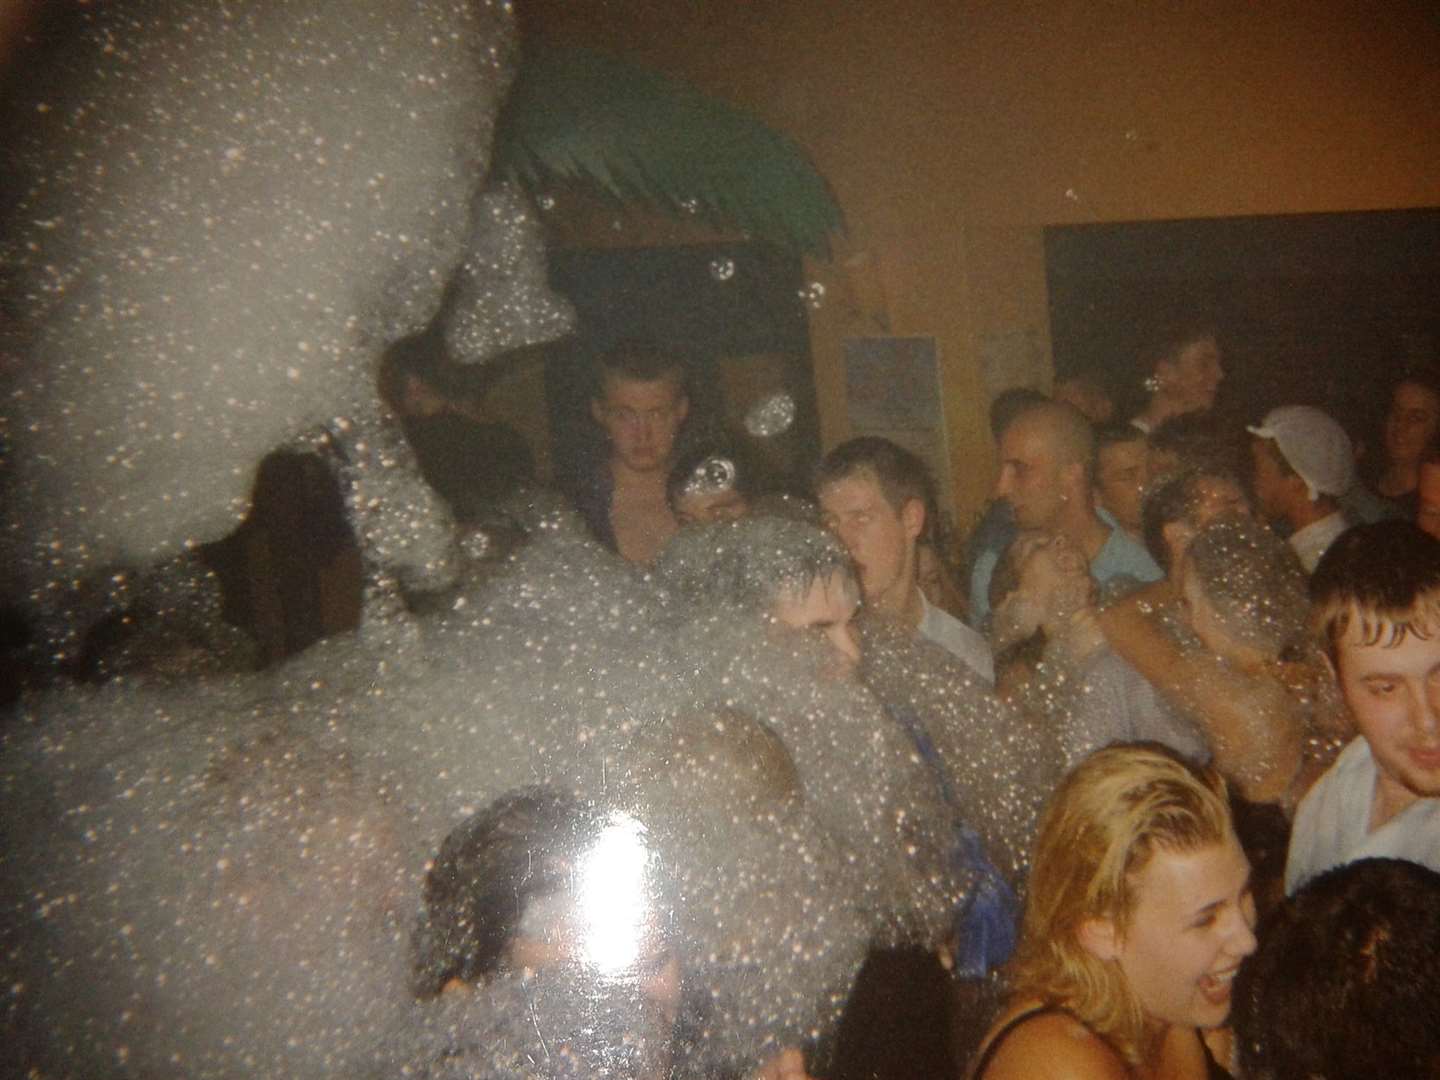 Foam party at Polo Bar in Bexleyheath in the 90s. Picture: Thomas Fitzgerald